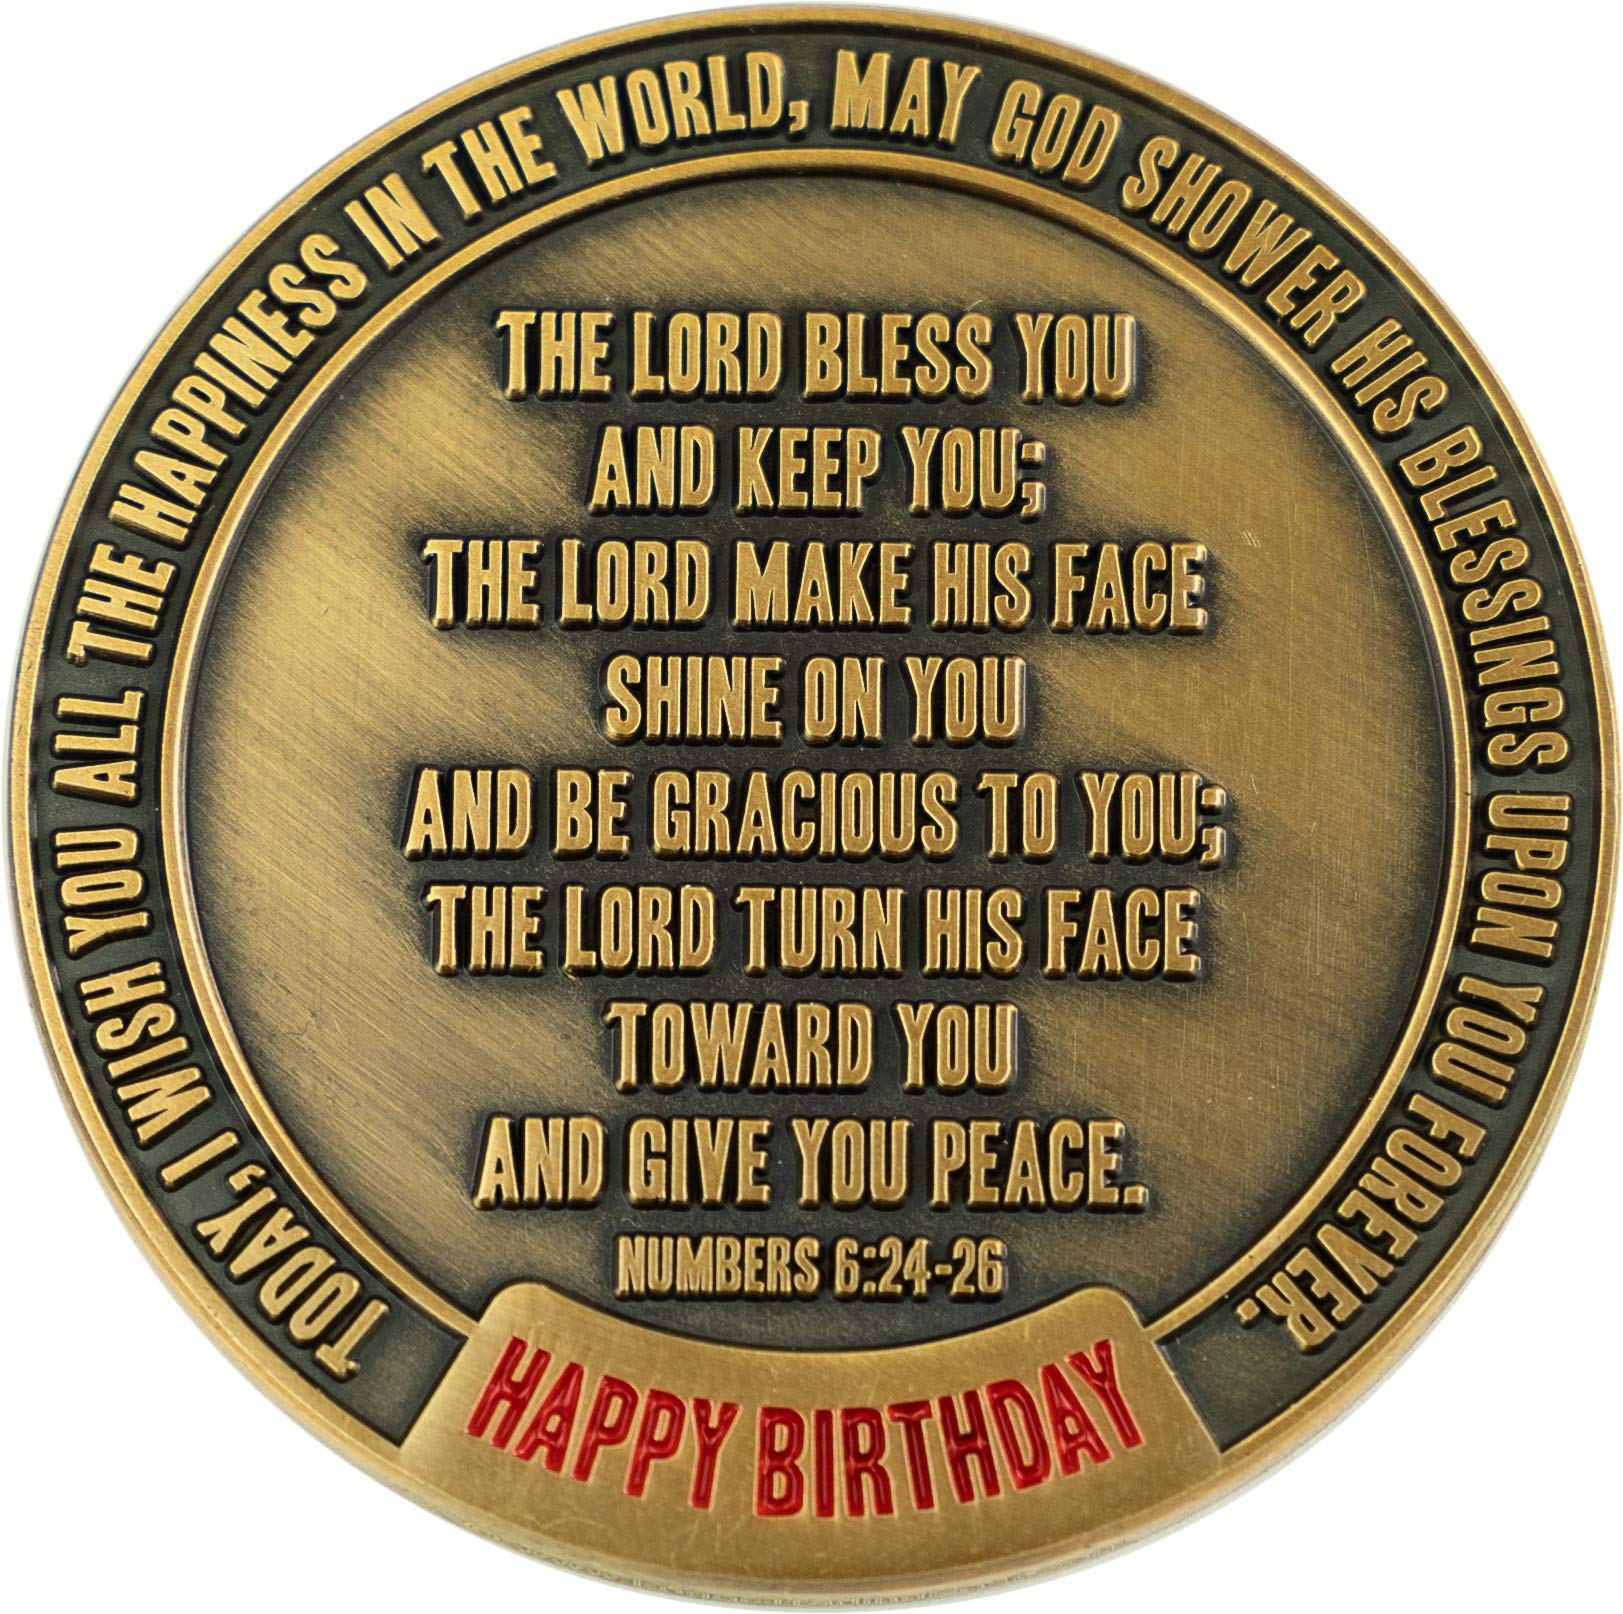 Happy Birthday Coin, Christian Birthday Gifts for Friends for Siblings, Grandson or Granddaughter, Boys & Girls, Lord Bless You & Keep You Religious Antique Gold Plated Prayer Token